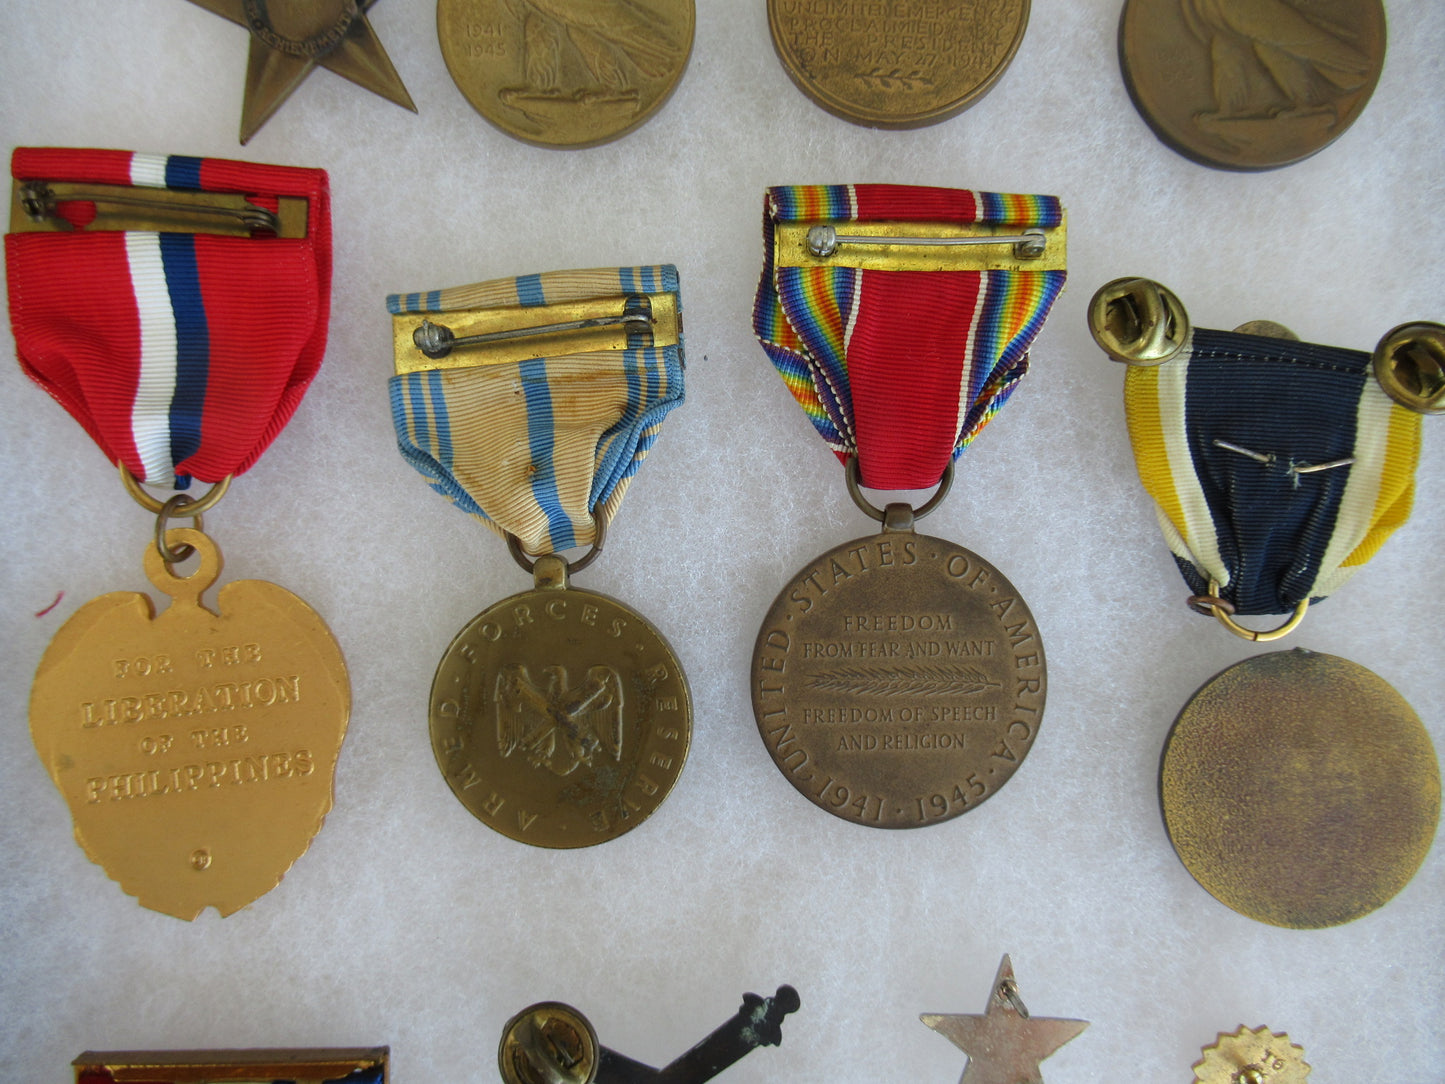 USA GROUP OF MEDALS DOCUMENTS BELONGING TO MAJ. GEN. WALDO FISH INCLUDING HIS NAMED BRONZE STAR, SERVICE RIBBON BAR, OTHER MEDALS AND INSIGNIA. NICE GROUP!